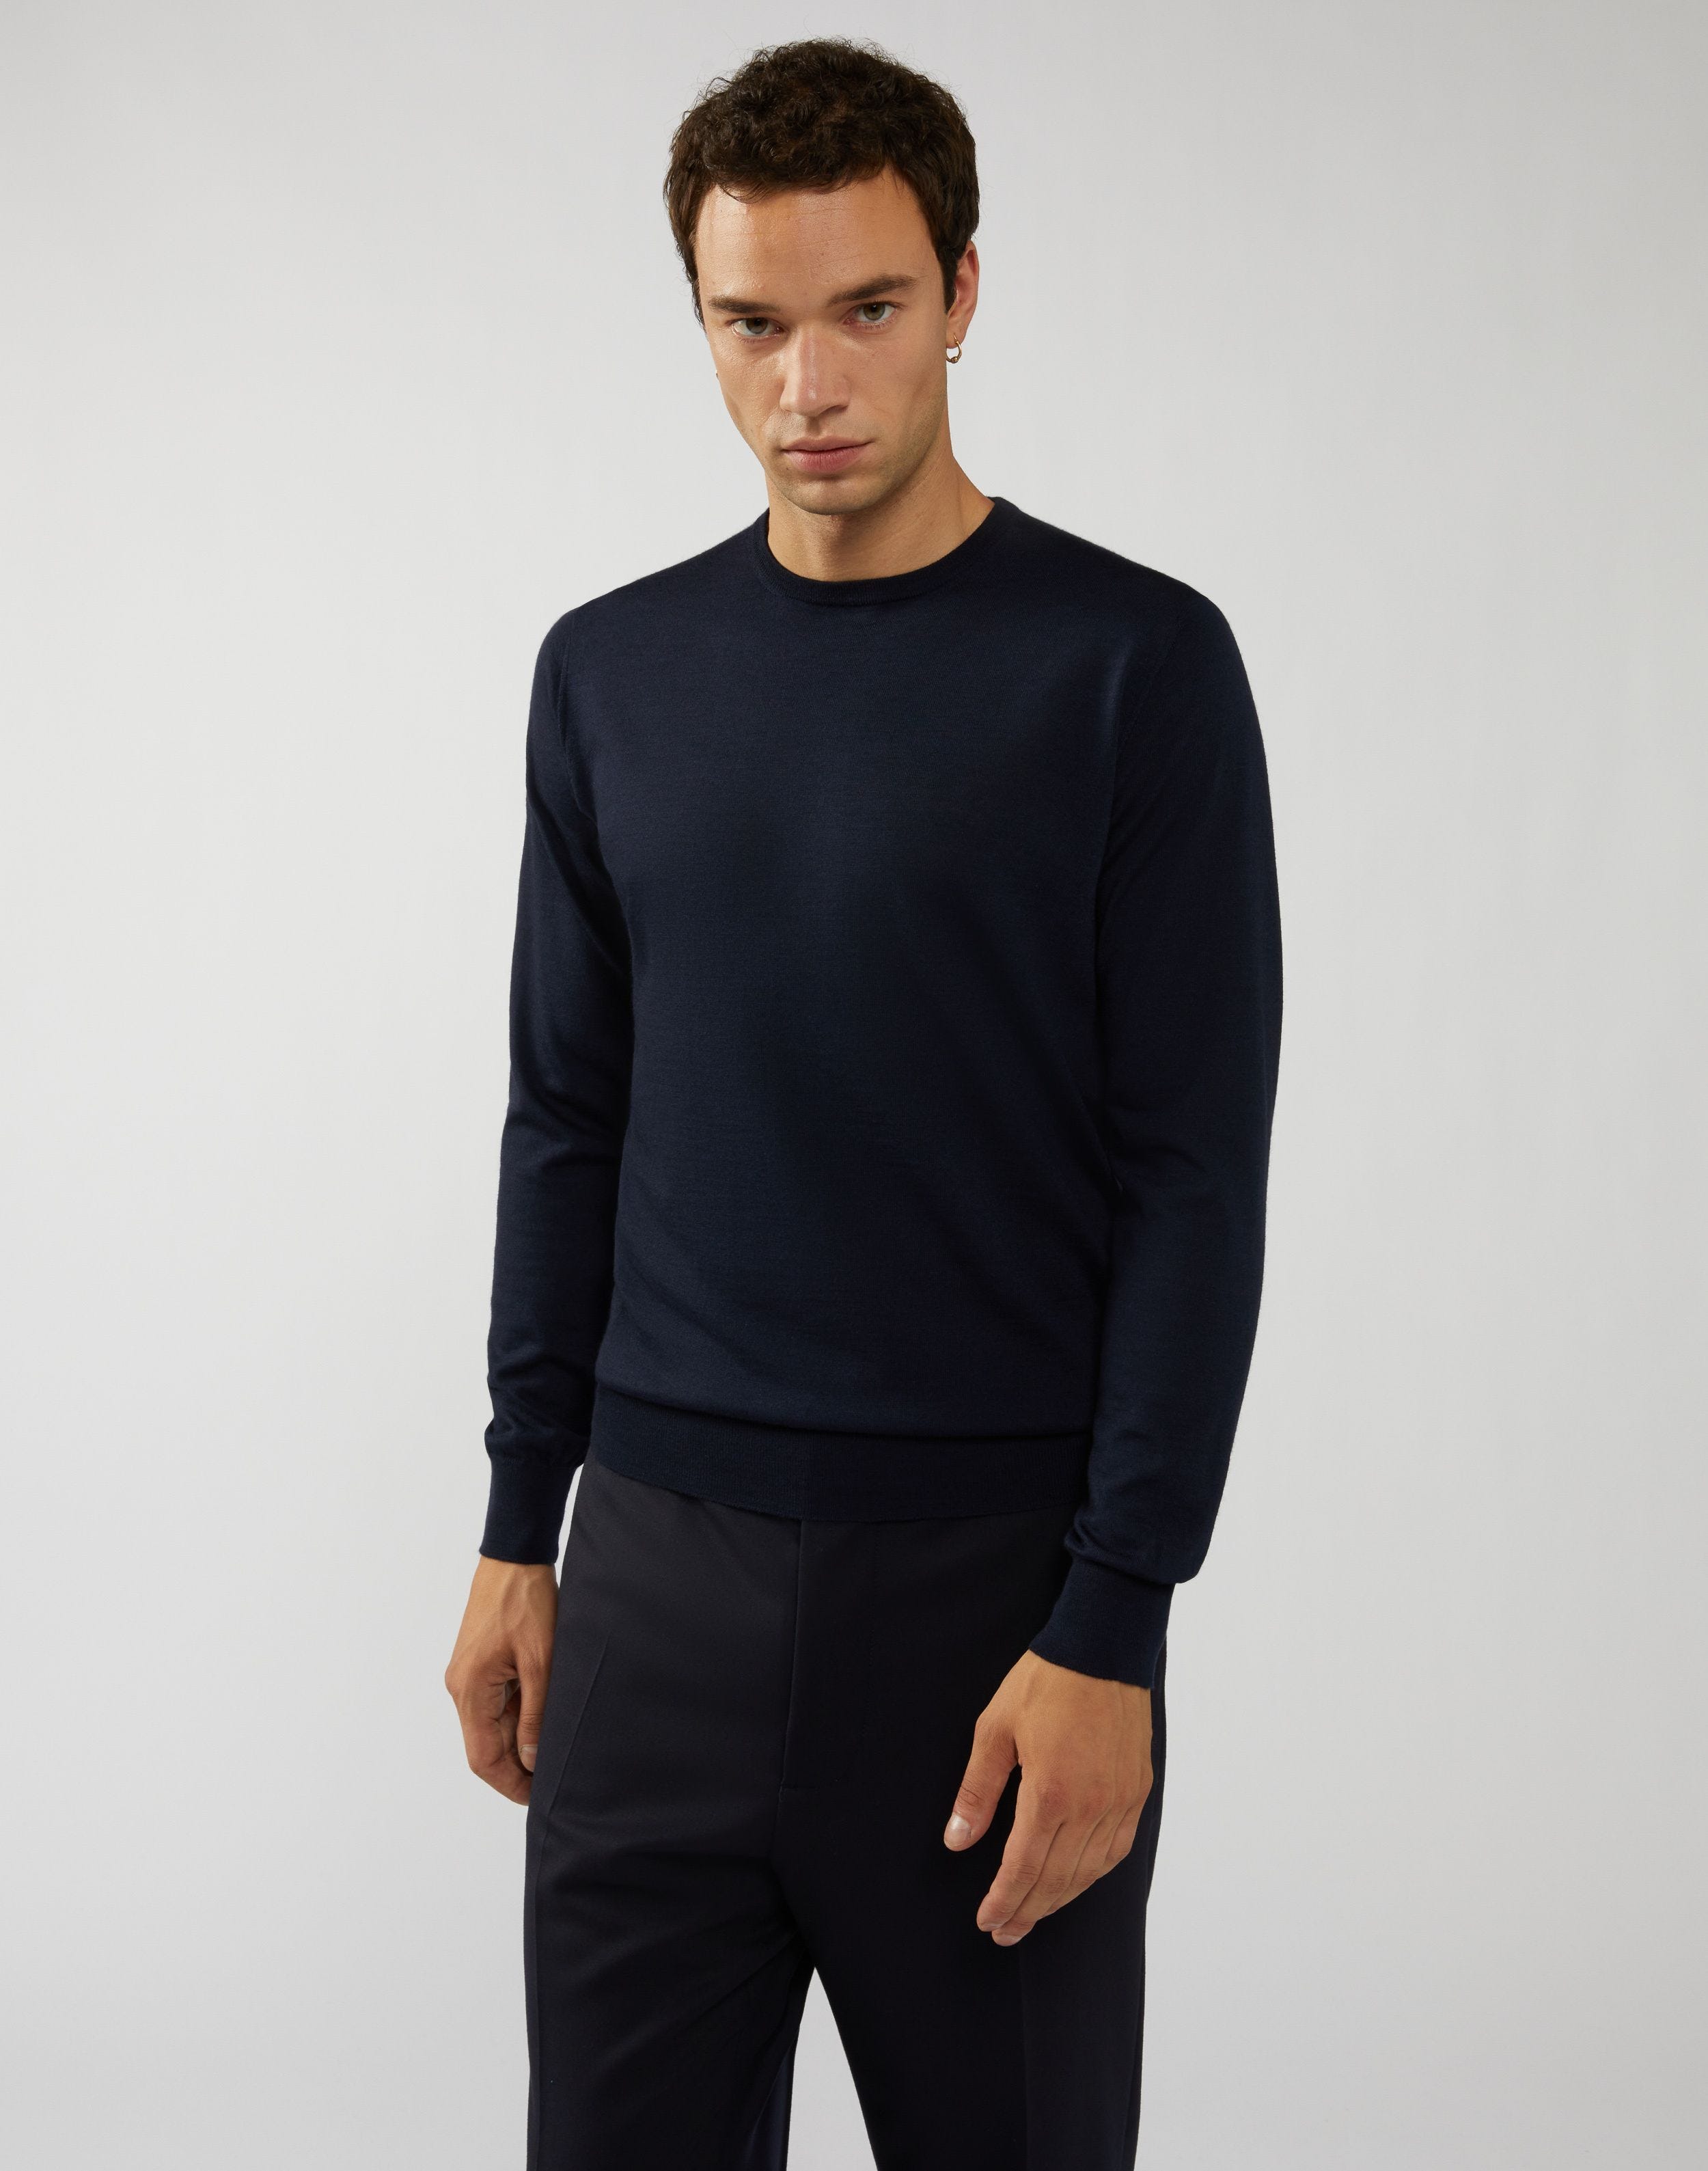 Round-neck blue knit in wool, silk and cashmere